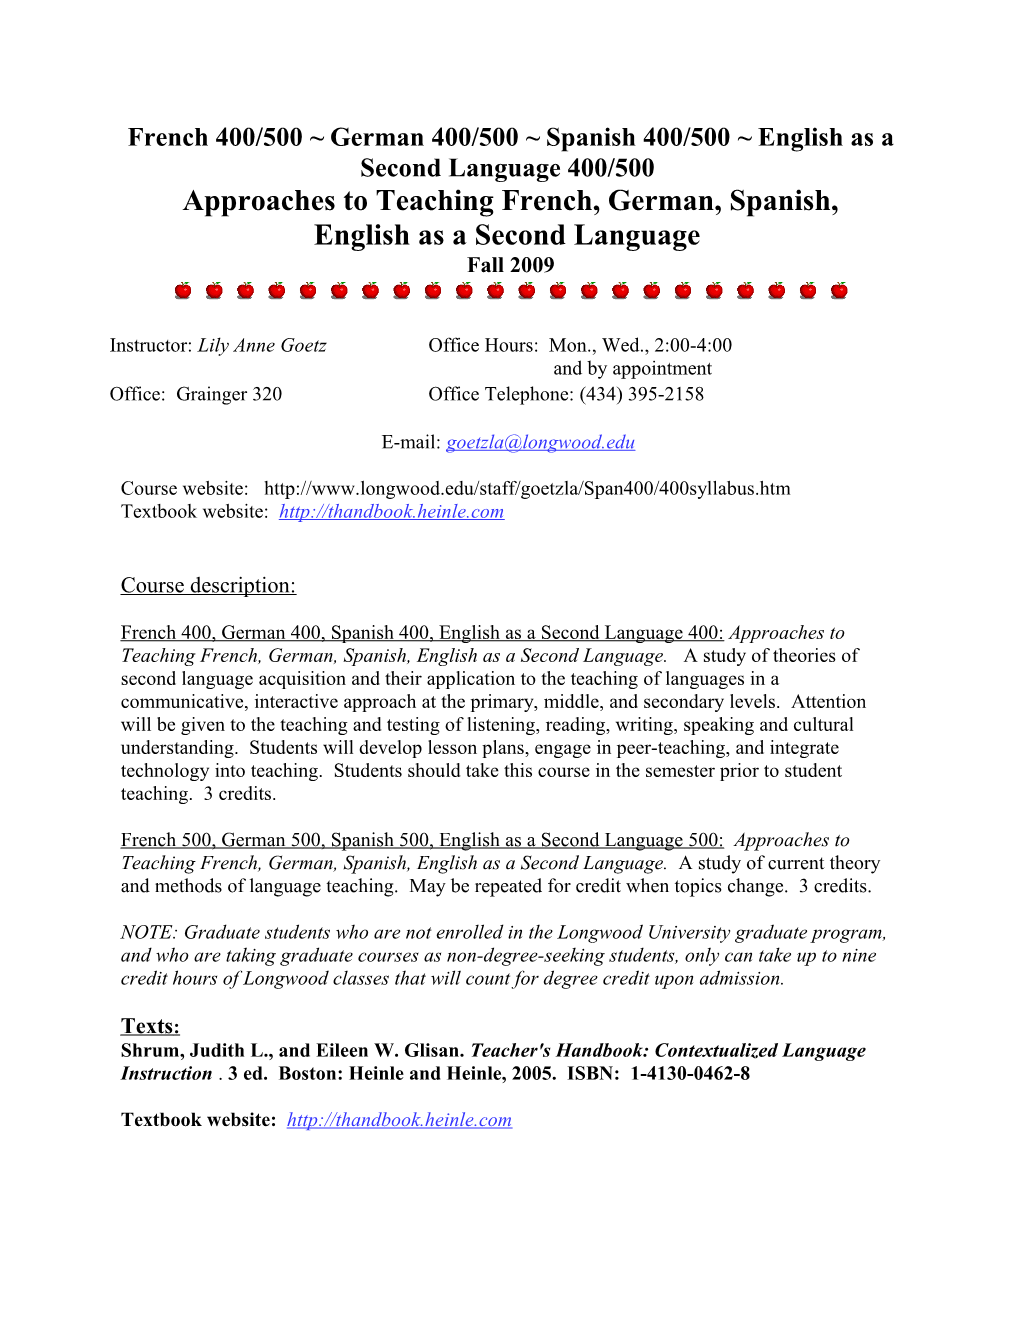 French 400/500 German 400/500 Spanish 400/500 English As a Second Language 400/500 Approaches